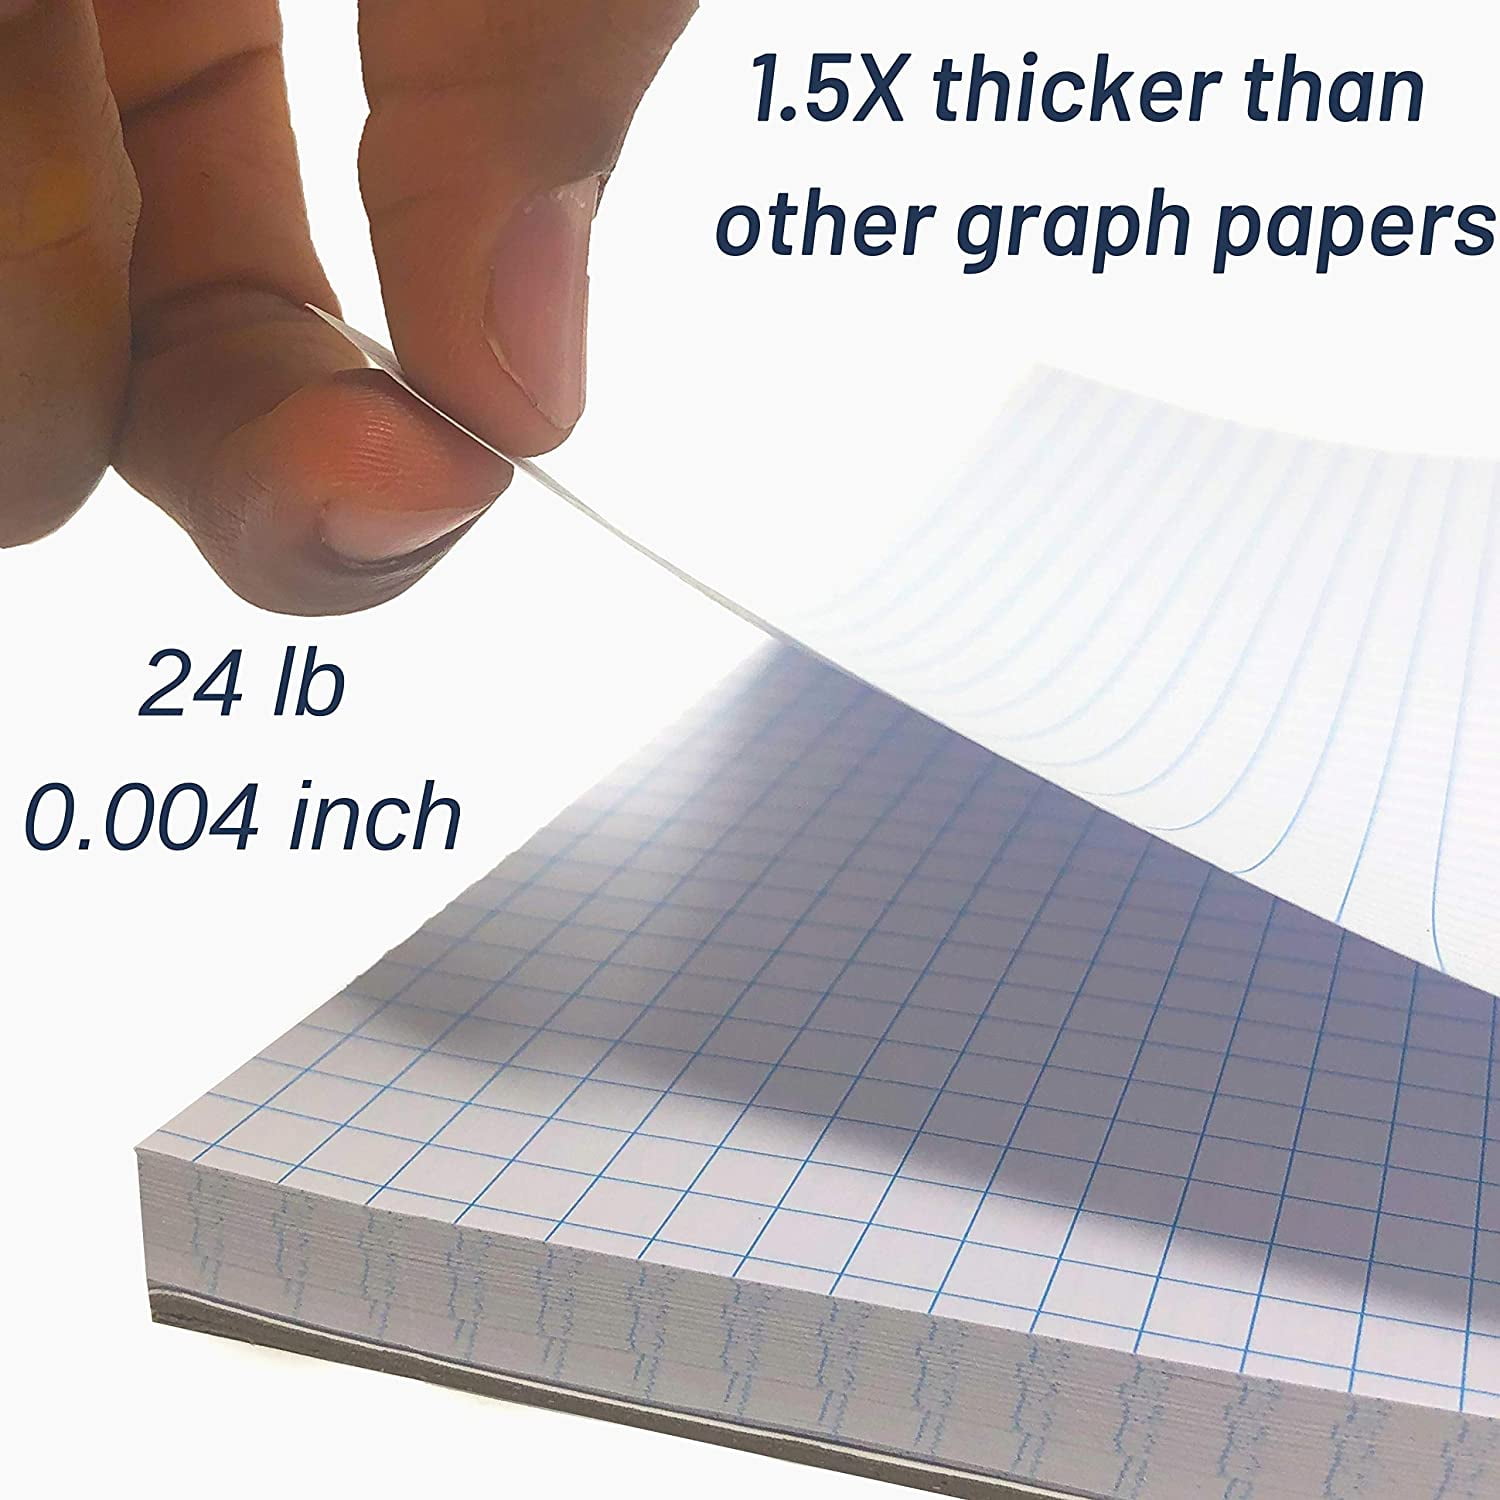 Graph Paper Pads 8.5 x 11, 100 Sheets, Grid Paper, Graphing Paper, Graph  Paper Pad, Math Graph Paper, Grid Paper Pad to Practice and Learn: 4x4  Graph